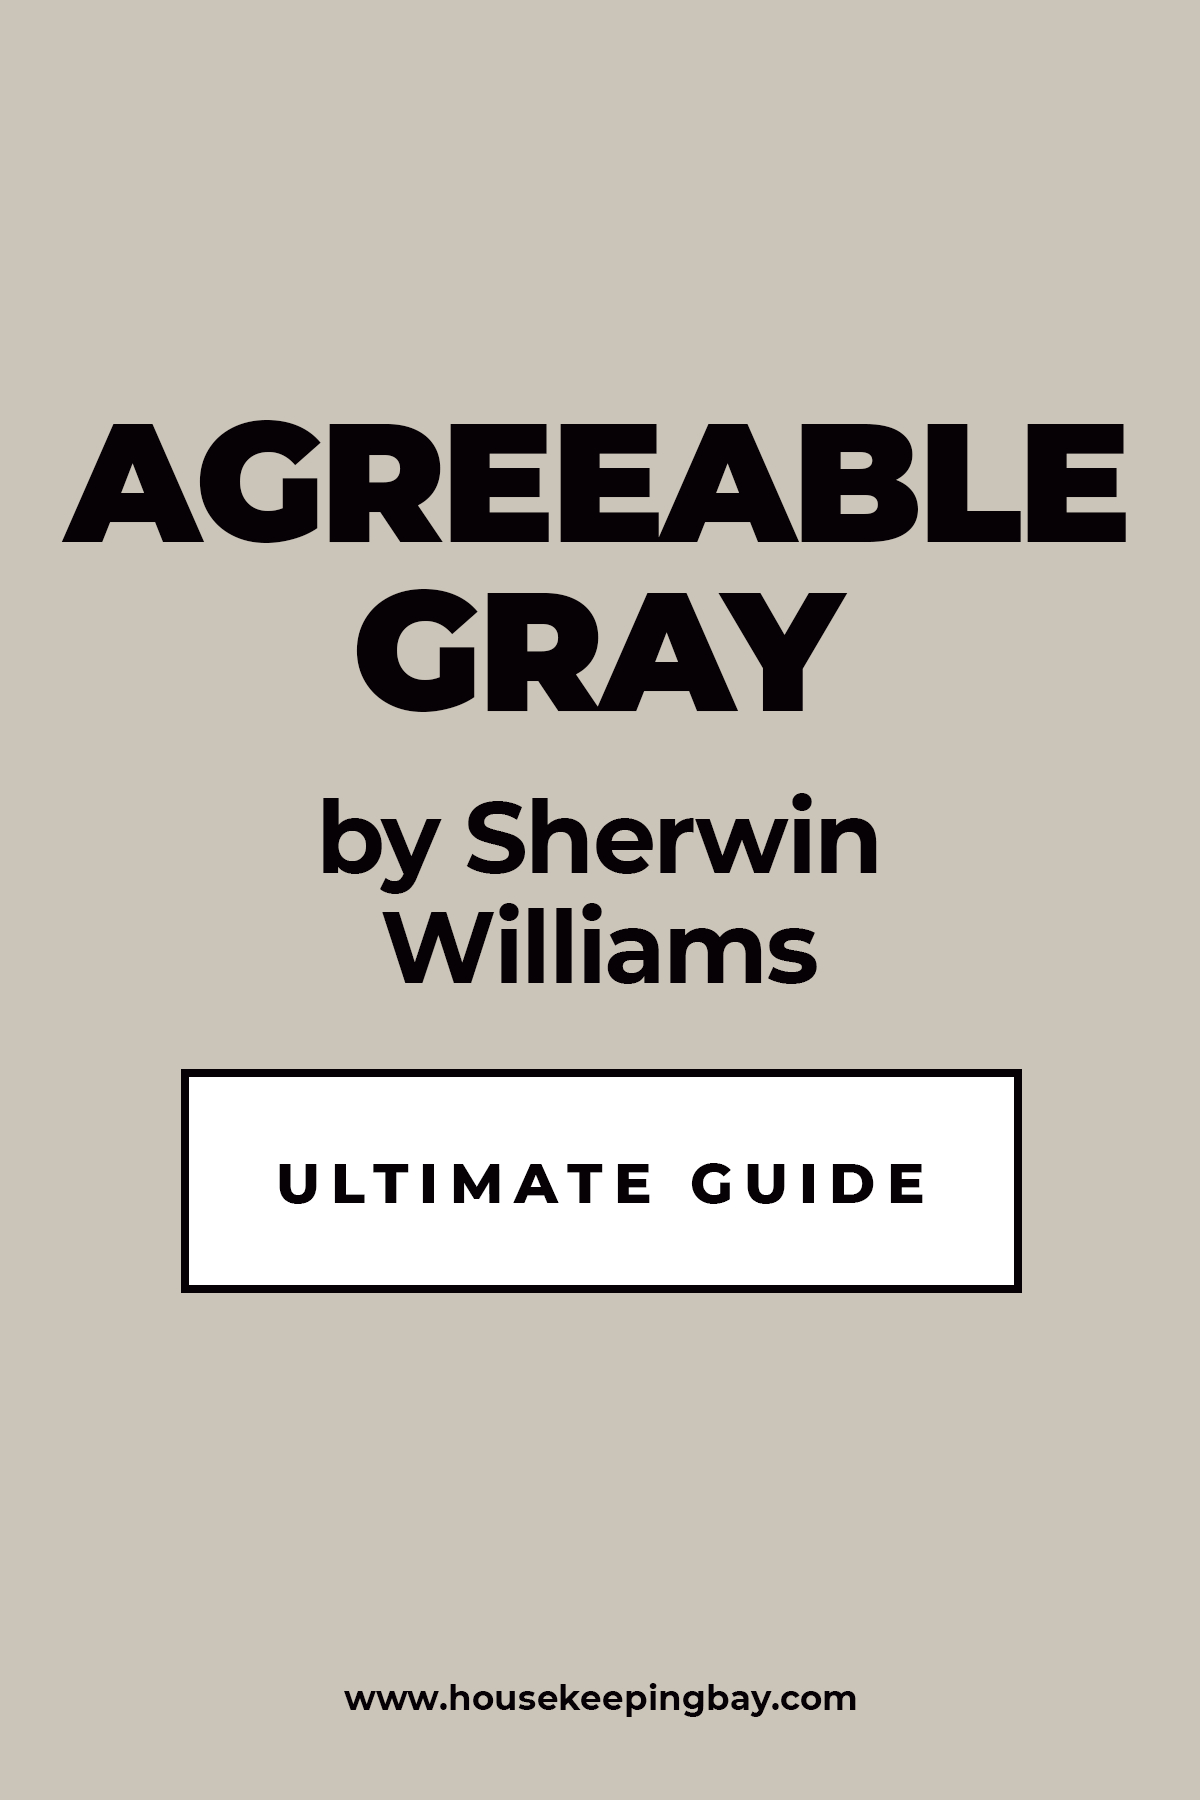 Agreeable Gray by Sherwin Williams ULTIMATE GUIDE